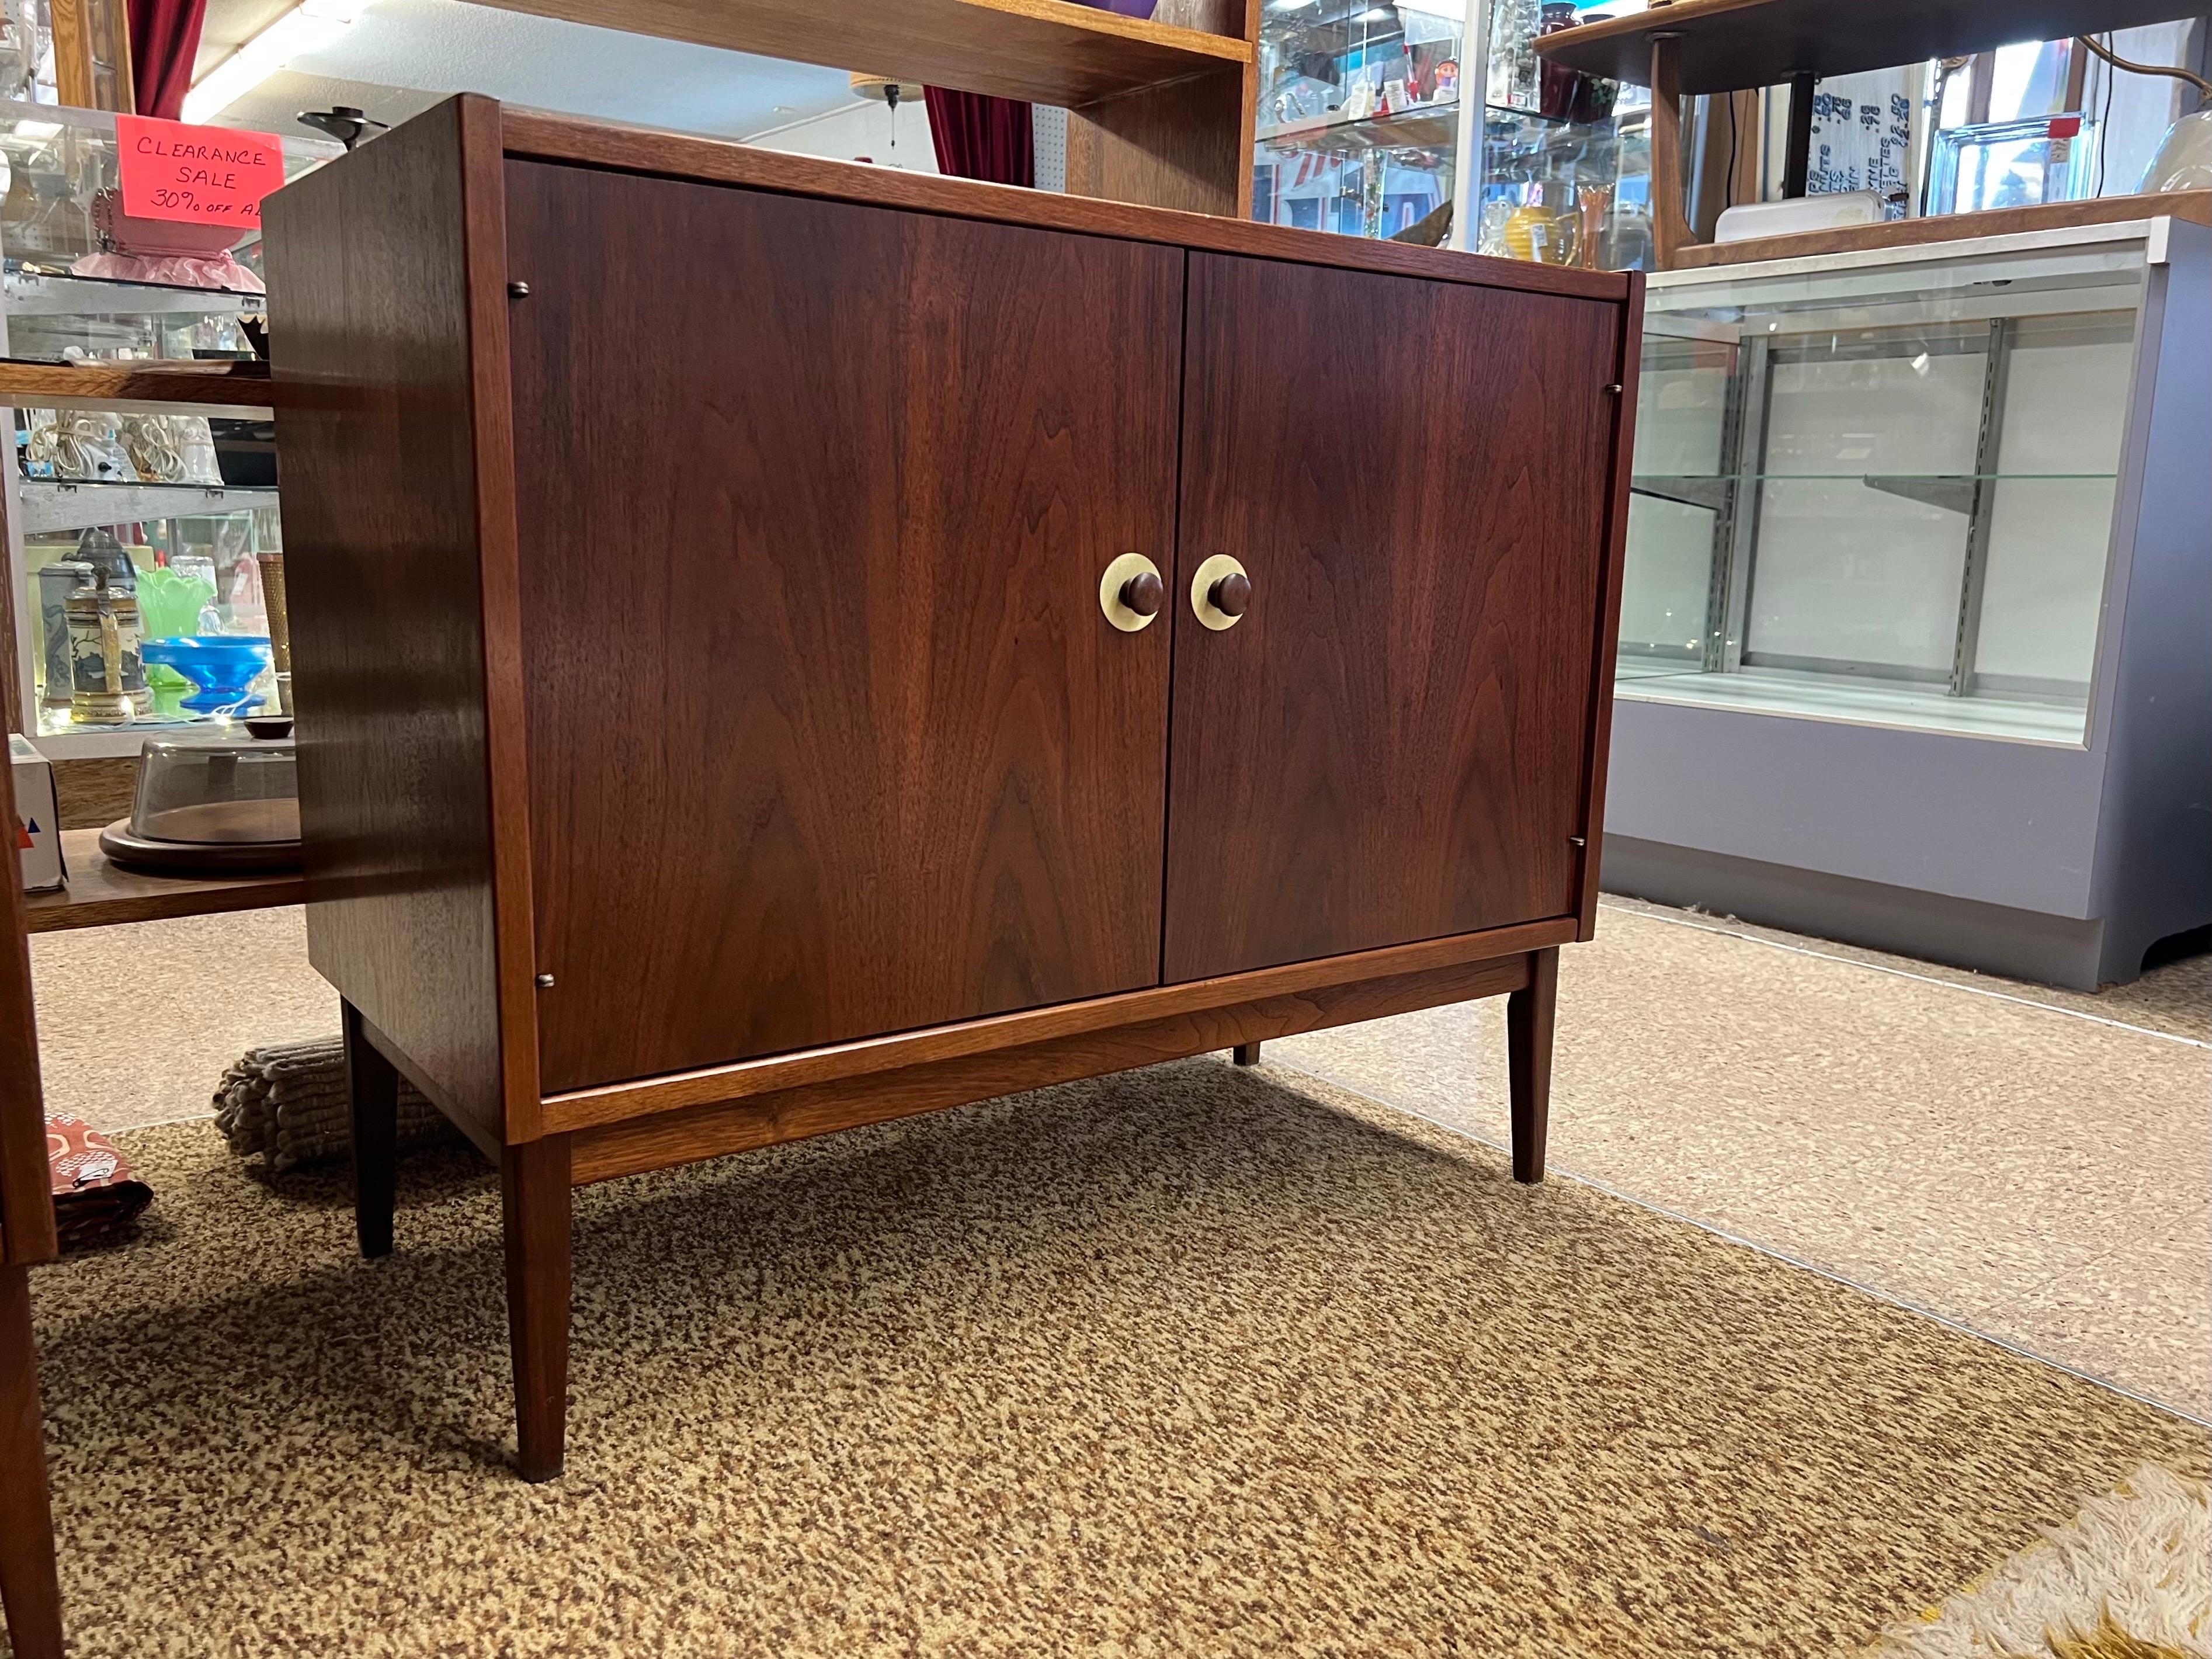 Vintage Mid-Century Modern record cabinet or credenza. Interior shelf is height adjustable.